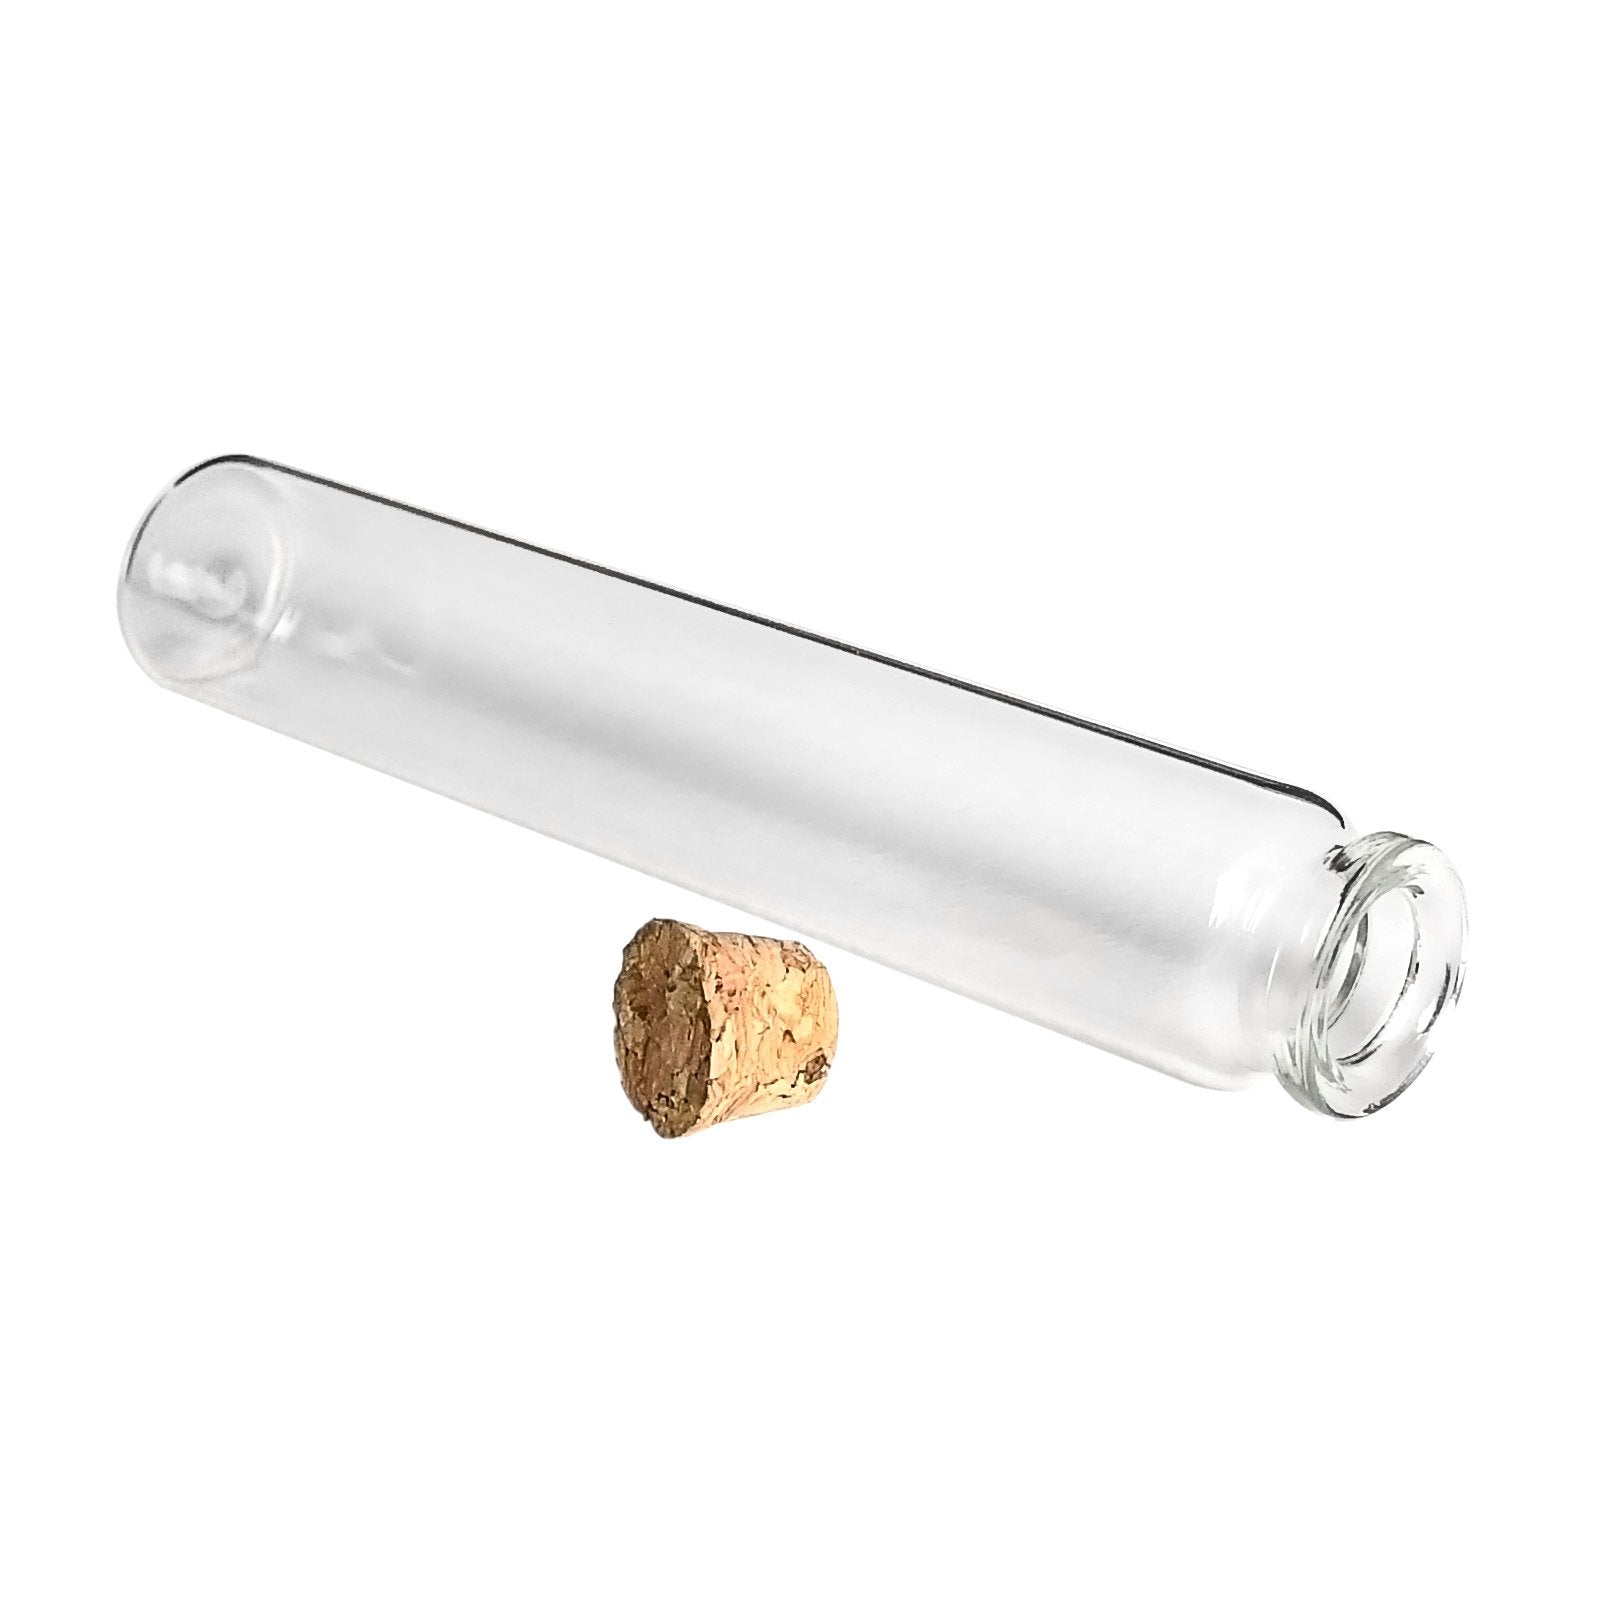 120mm Glass Pre-Roll Tube w/ Cork Top - 1 Count